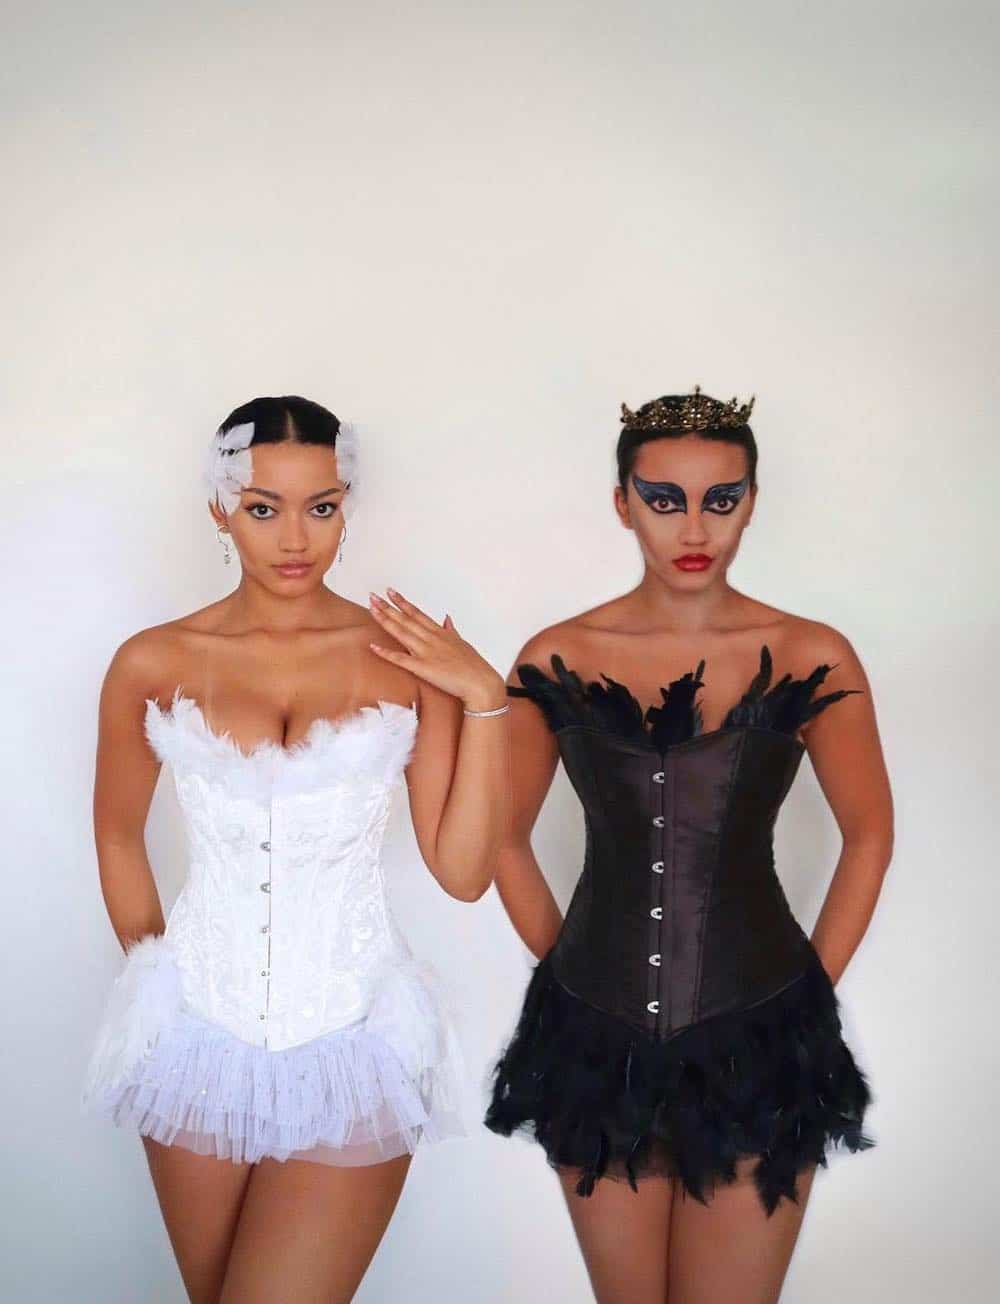 Two women dressed up as ballerinas from Black Swan on Halloween.